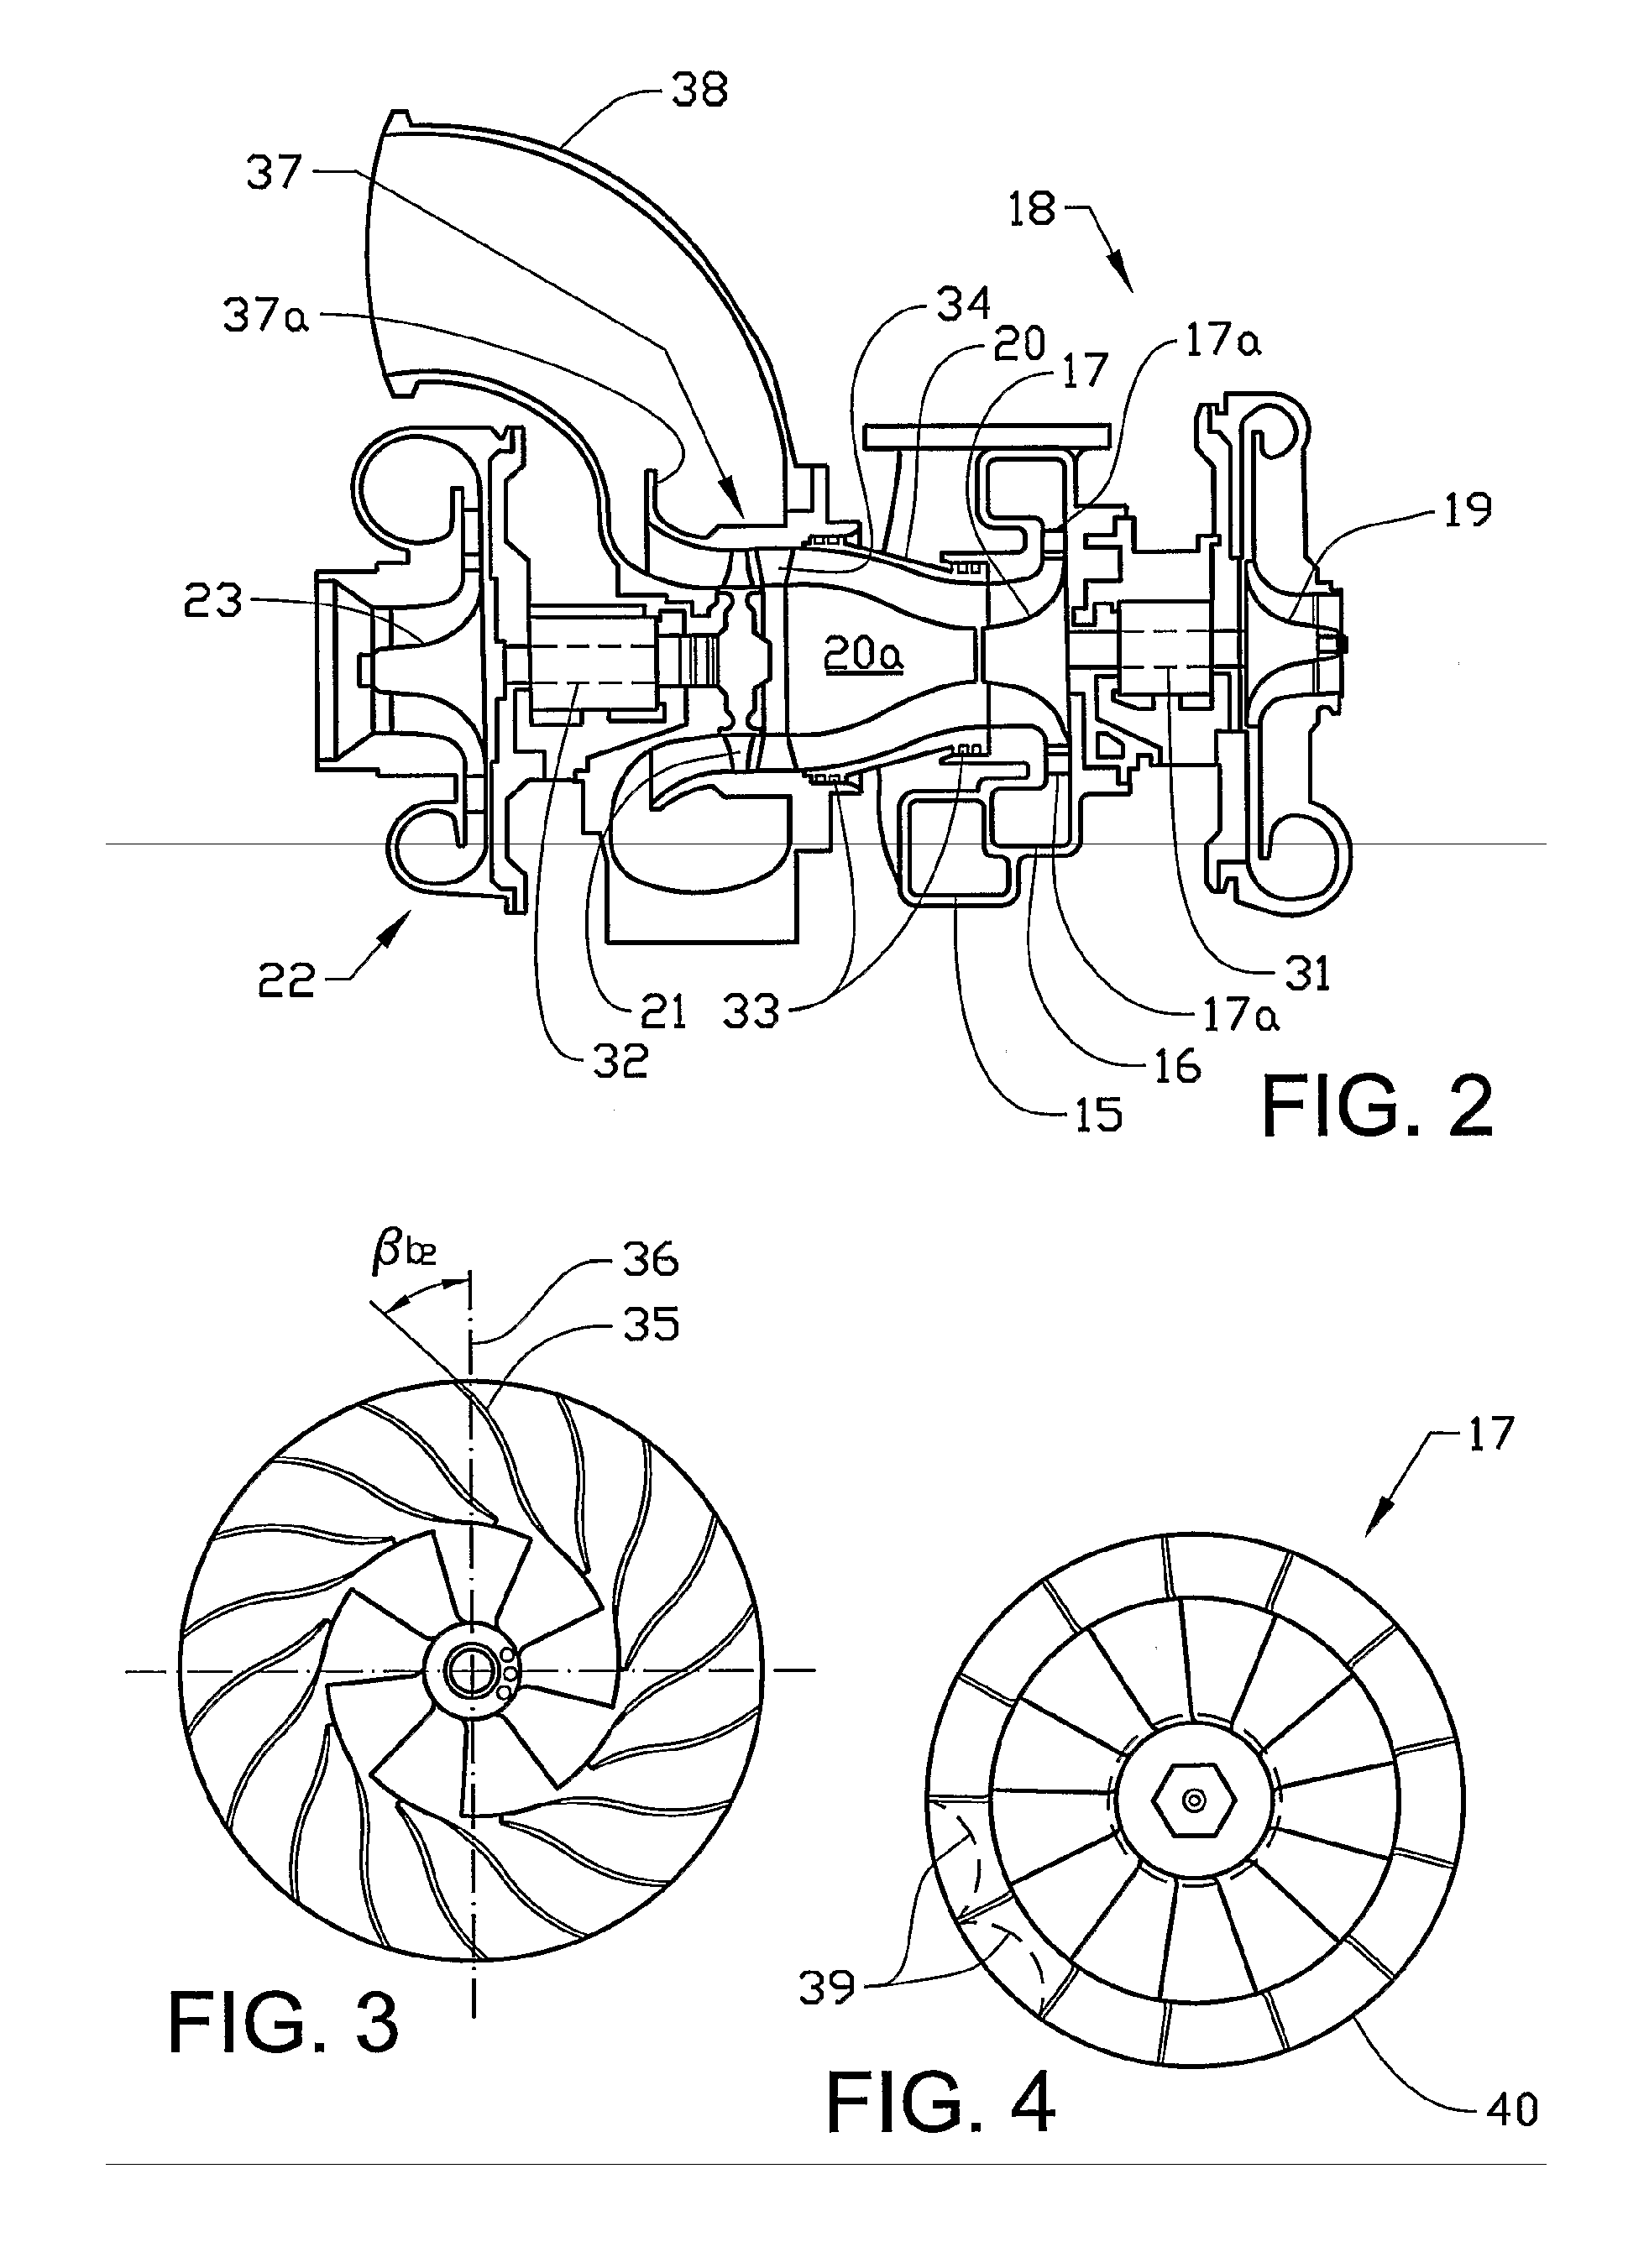 Turbochanger system for internal combustion engine comprising two compressor stages of the radial type provided with compressor wheels having backswept blades